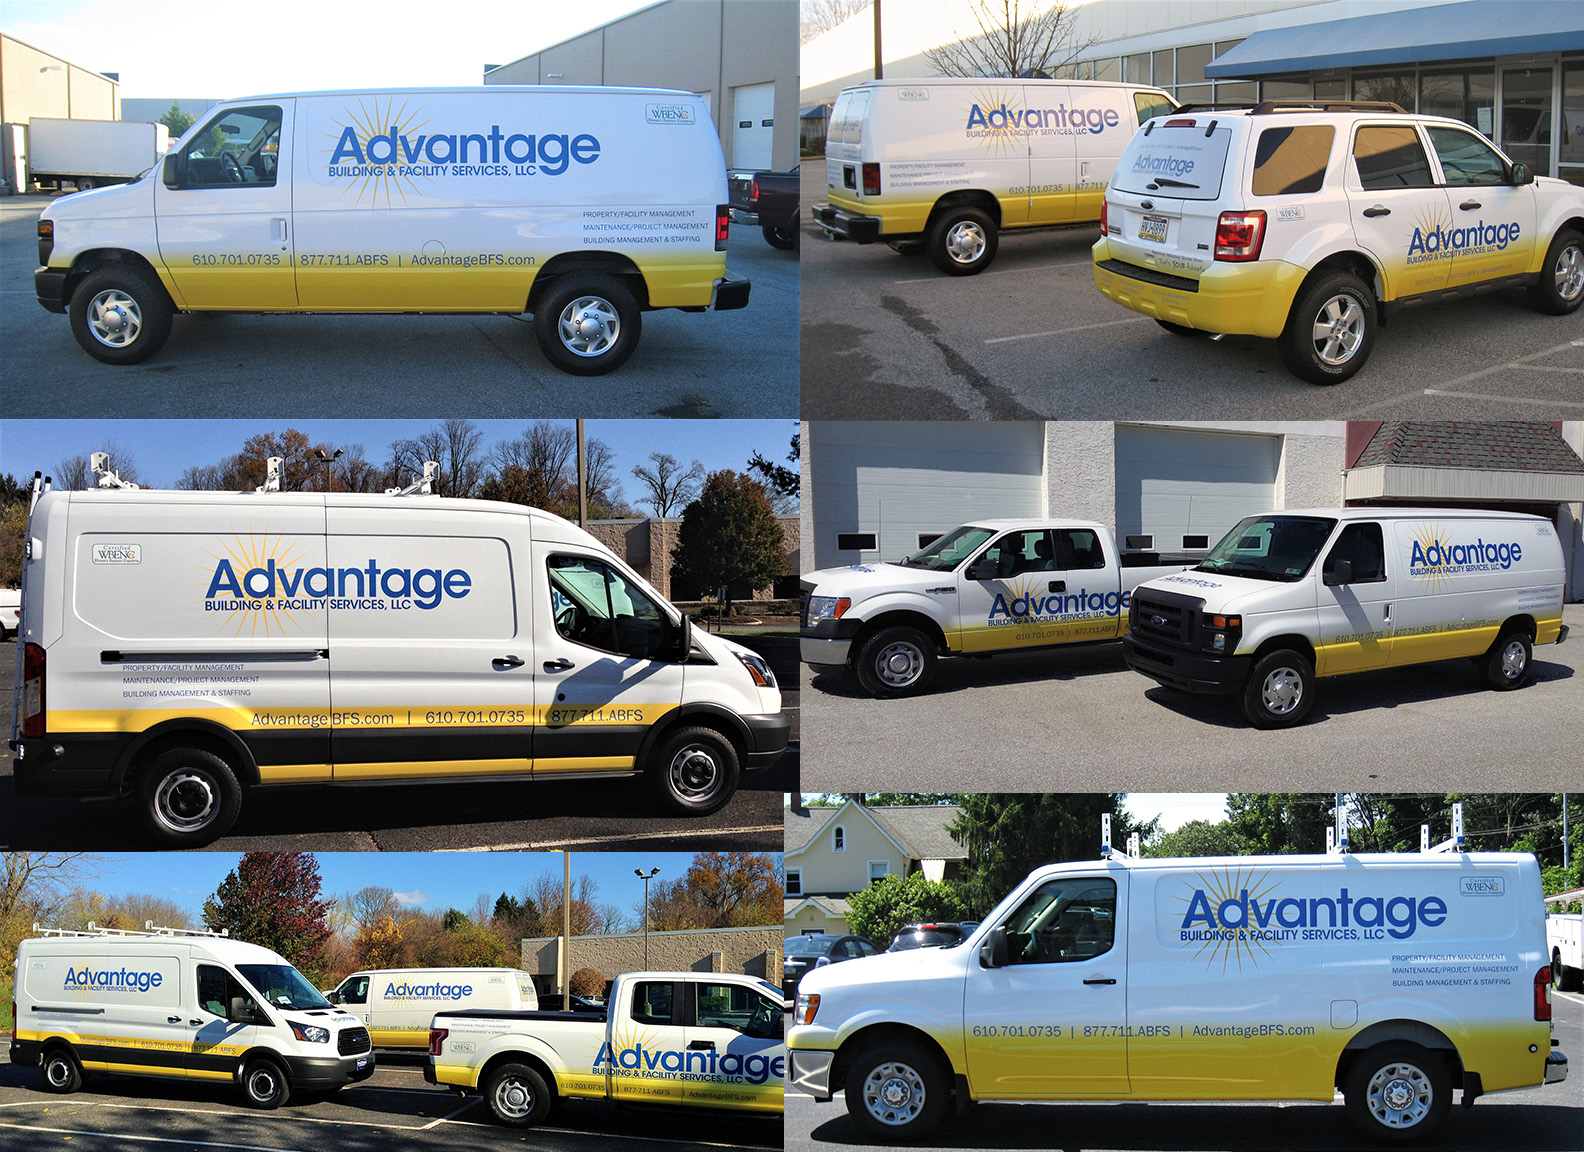 A fleet of vehicles with custom designed vehicle wraps for Advantage Building & Facility Services, LLC.